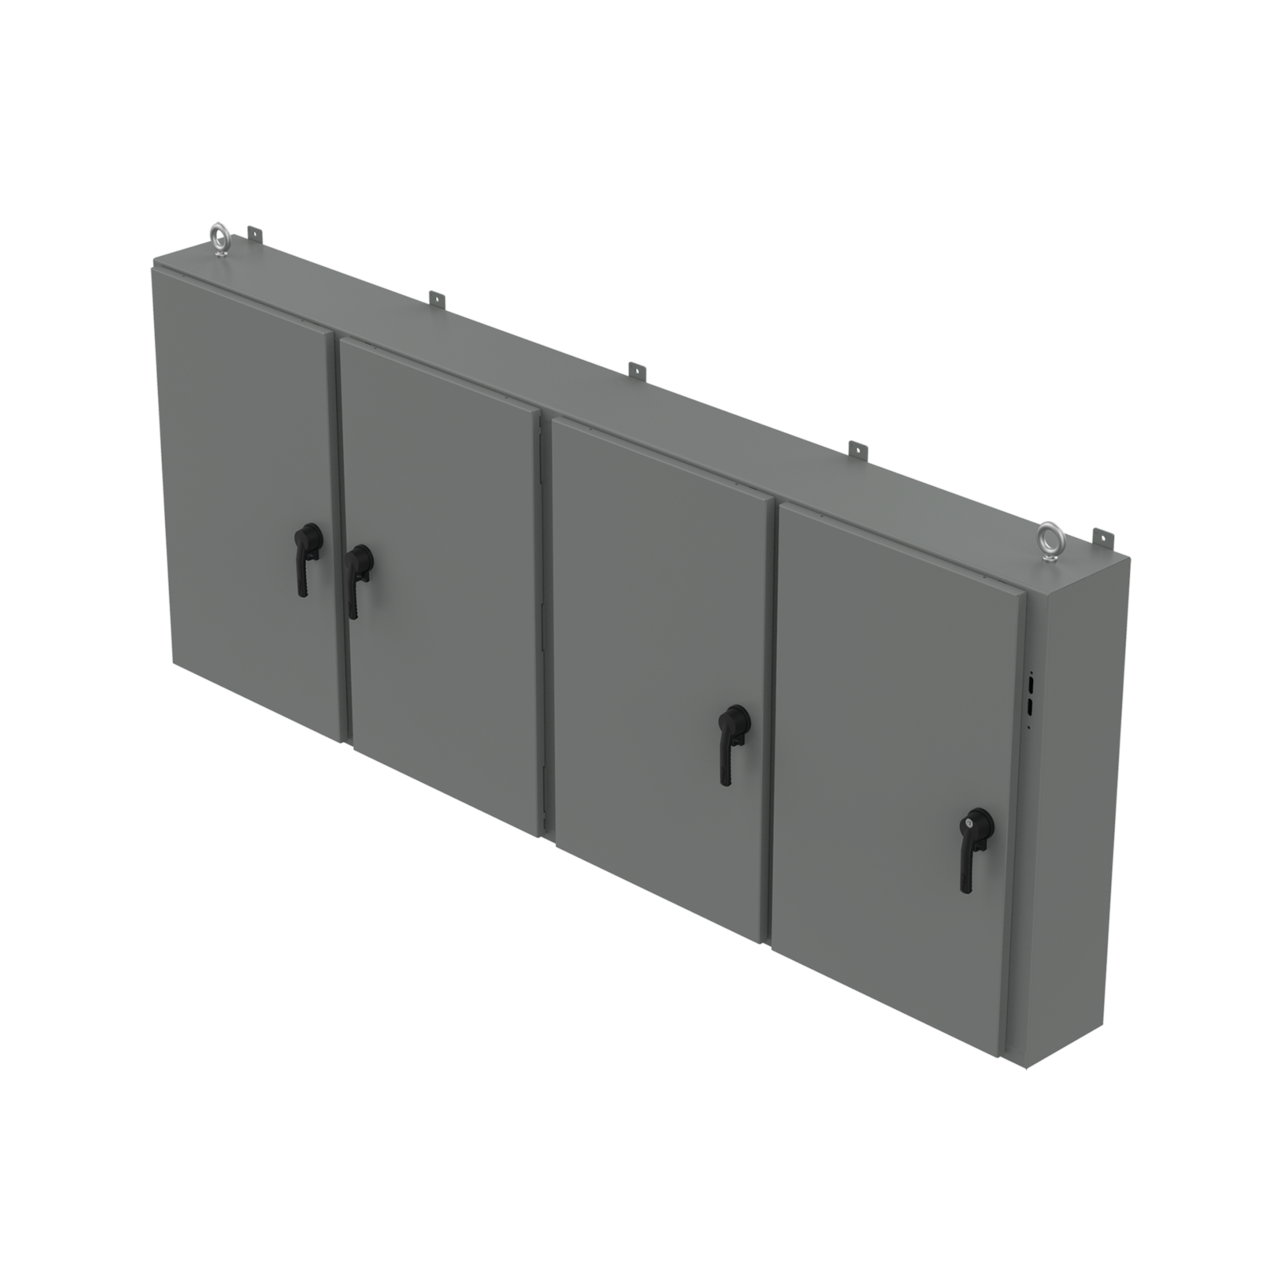 nVent HOFFMAN A60X4E15718 A26MM 4-Door Low Profile Disconnect Enclosure With Handle, 60 in L x 156-1/2 in W x 18 in D, NEMA 12/IP55 NEMA Rating, Steel